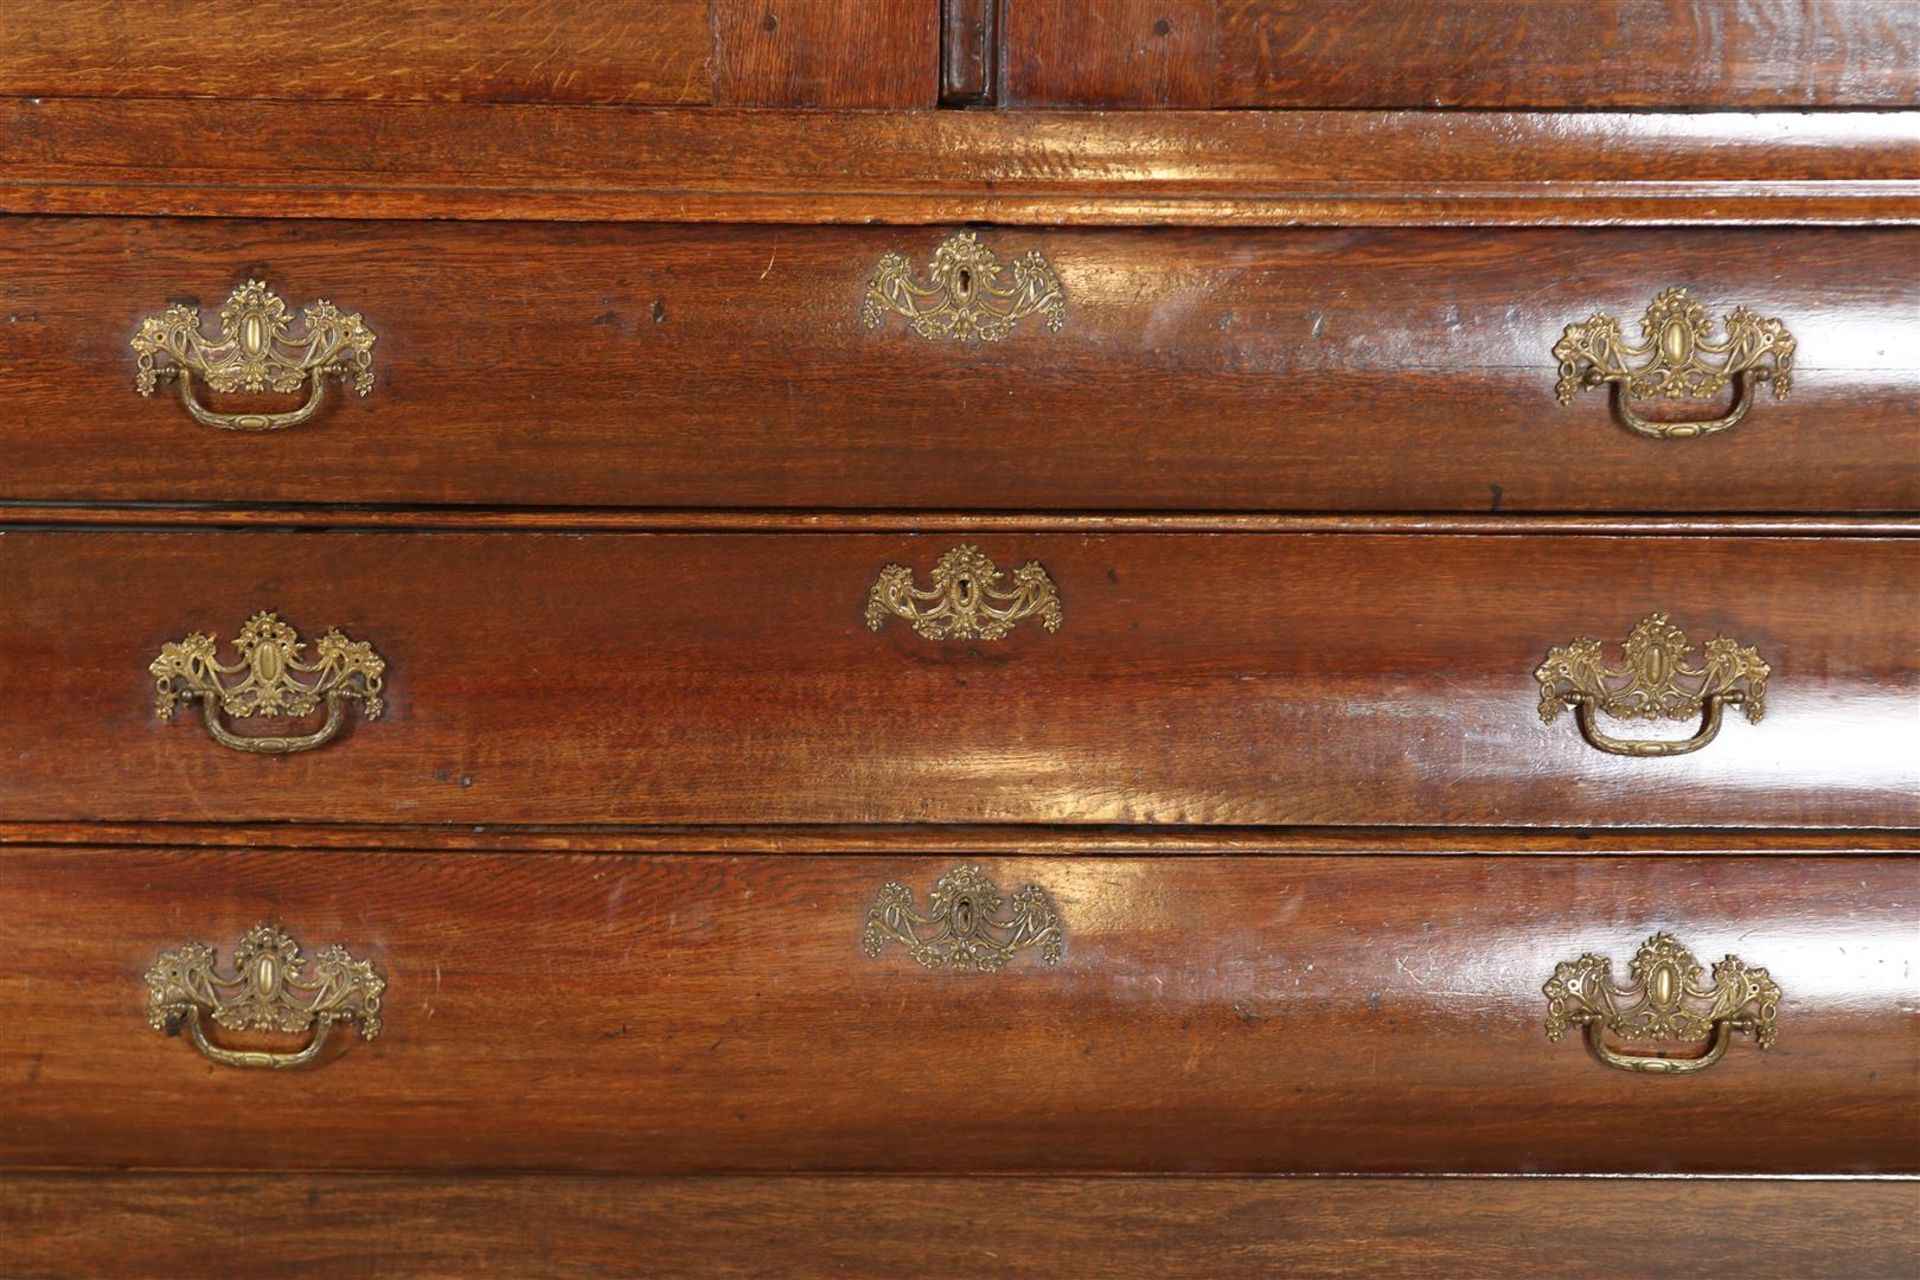 Oak Louis XV cabinet with contoured hood with carved crest, 2 panel doors on 3 curved drawers - Image 6 of 6